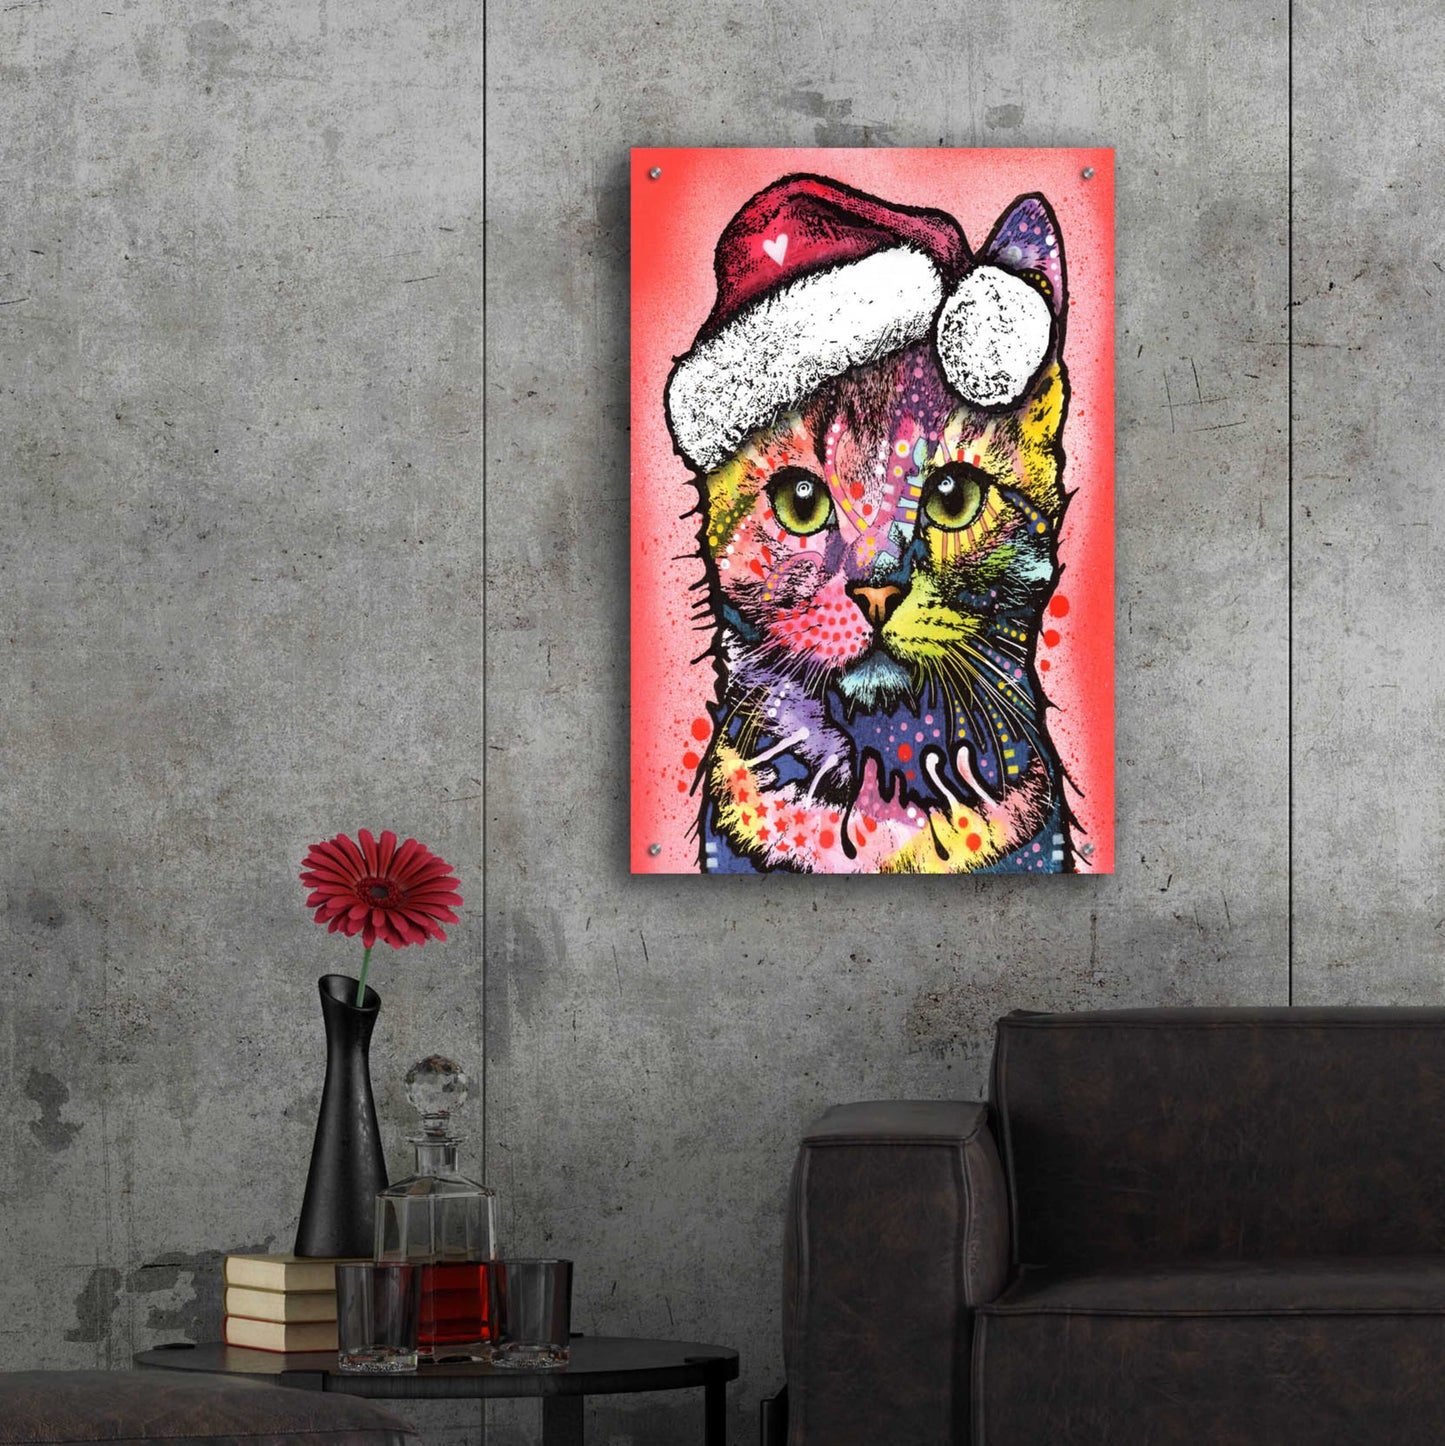 Epic Art 'Christmas Cat' by Dean Russo, Acrylic Glass Wall Art,24x36